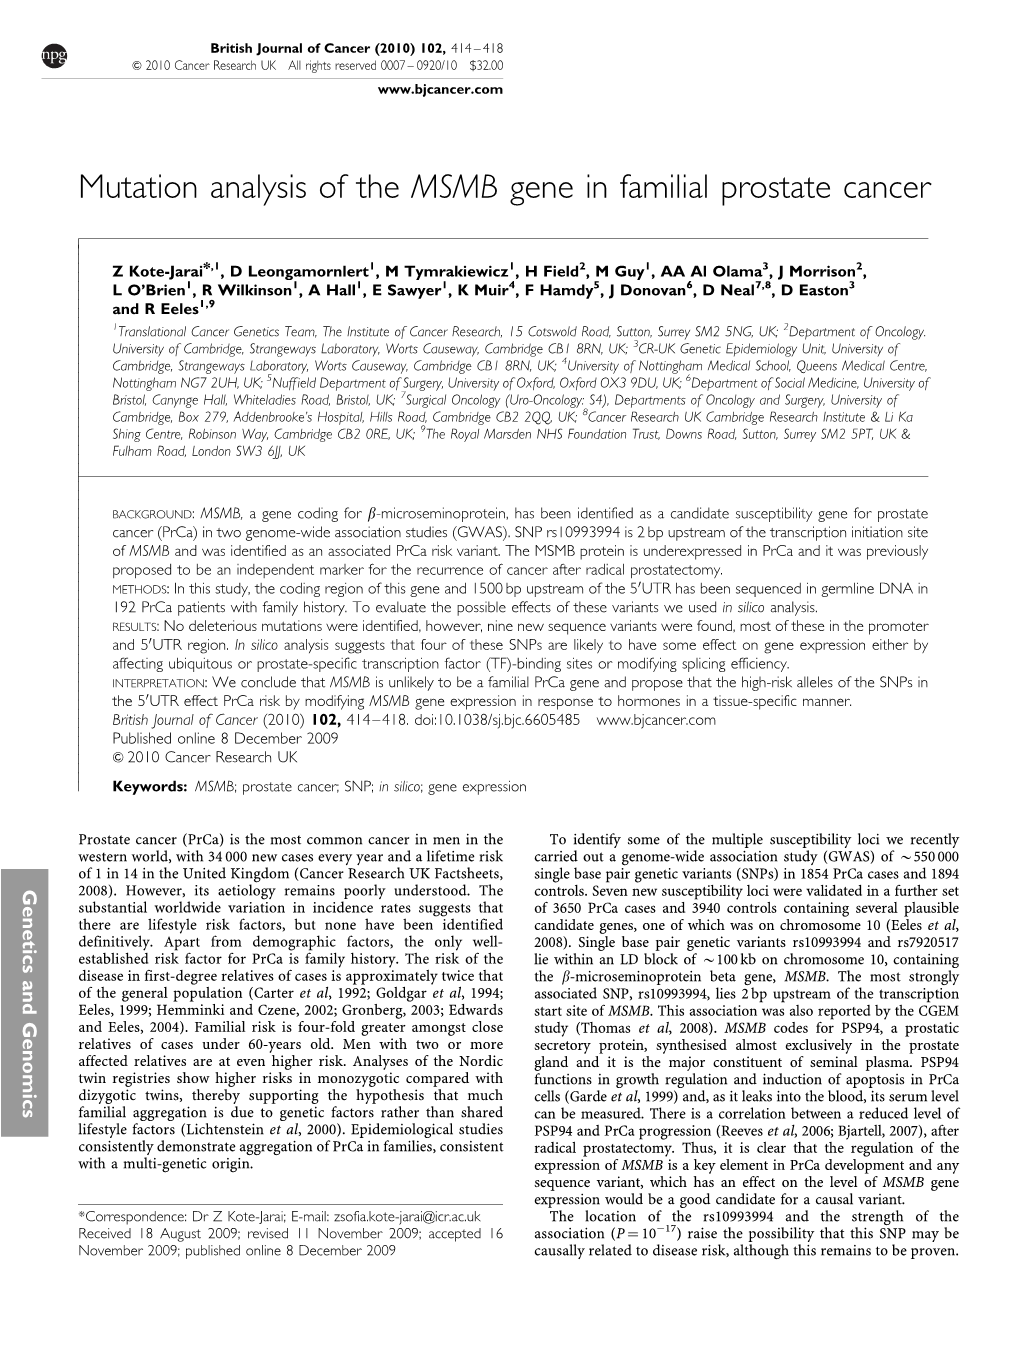 Mutation Analysis of the MSMB Gene in Familial Prostate Cancer